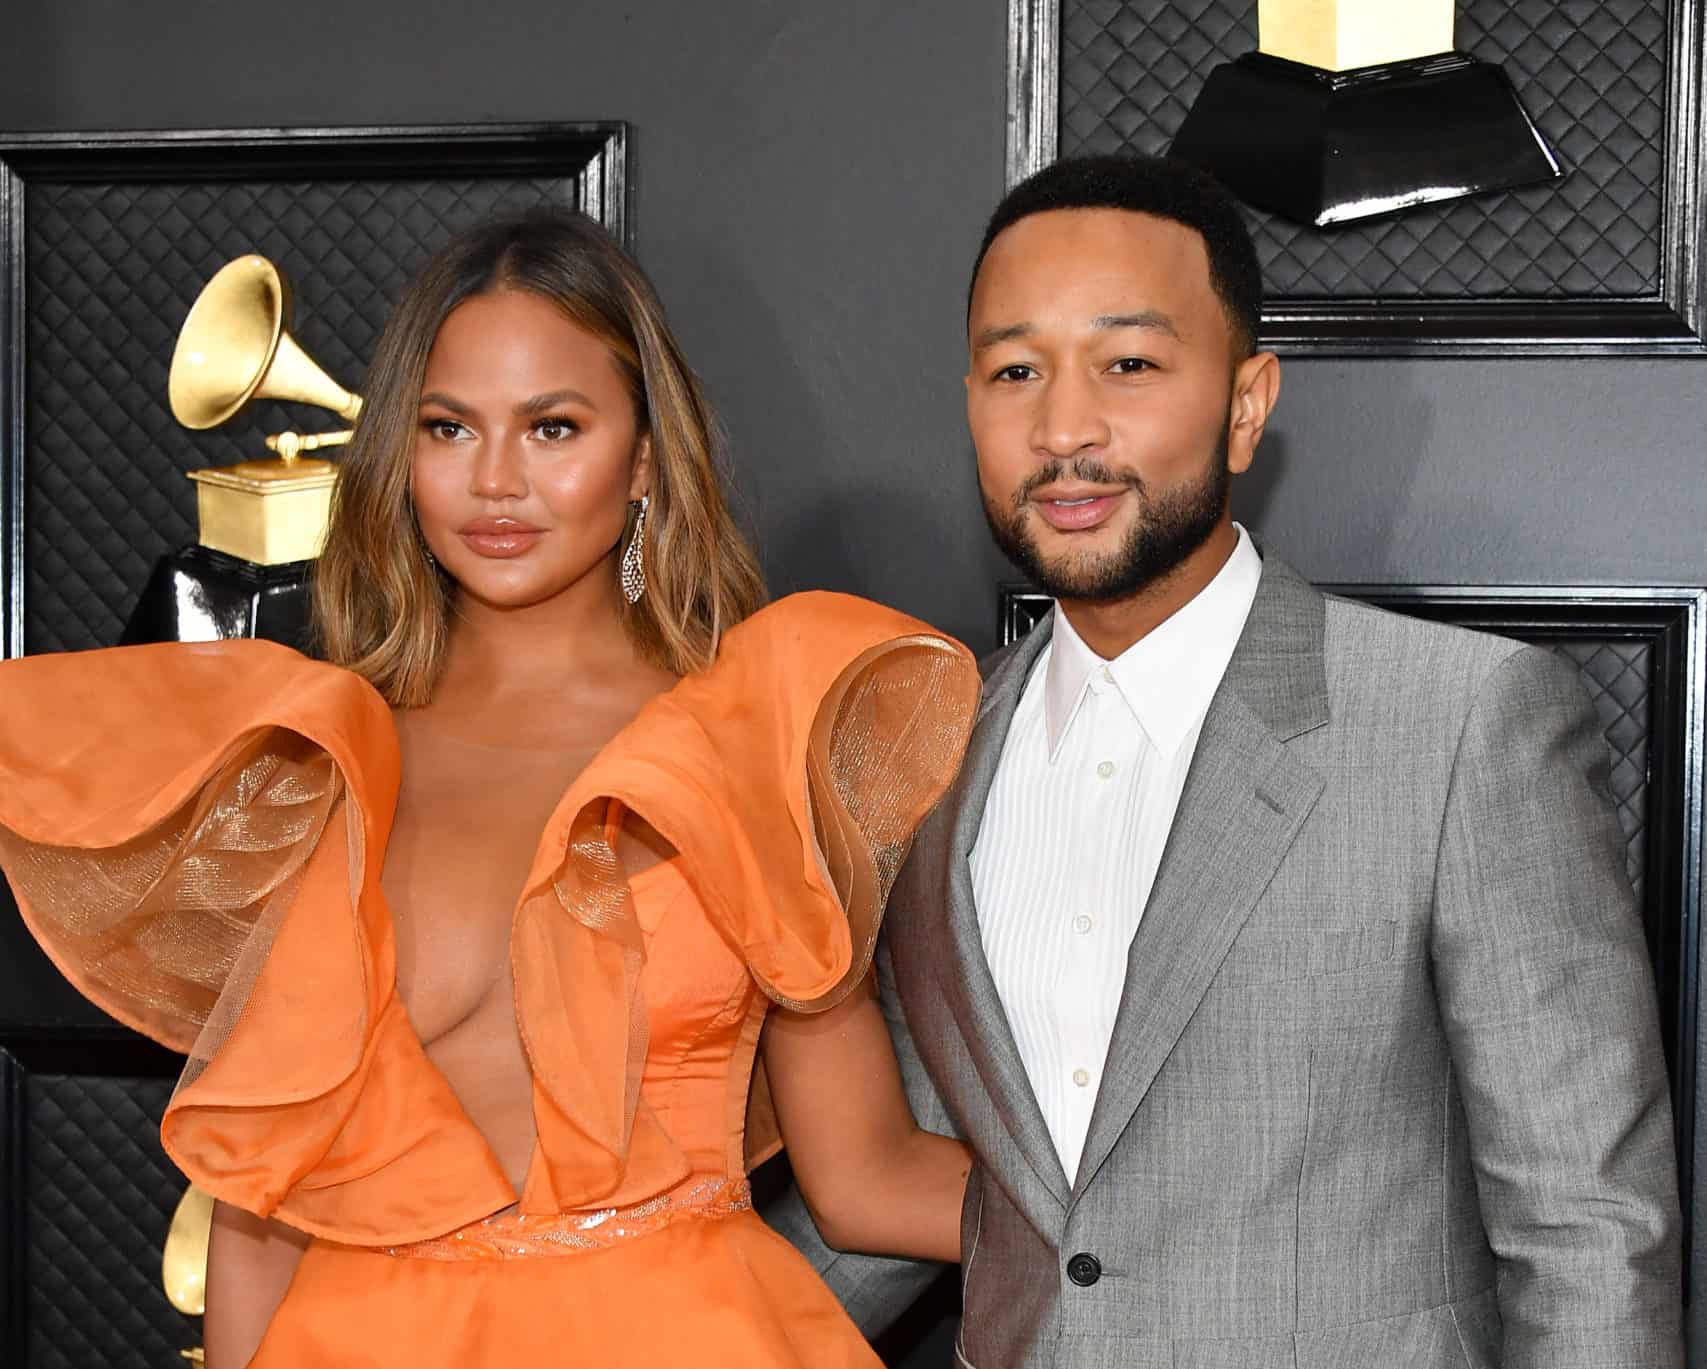 John Legend Claps Back At Michael Costello’s Claims Against Chrissy Teigen & Provides Alleged Receipts